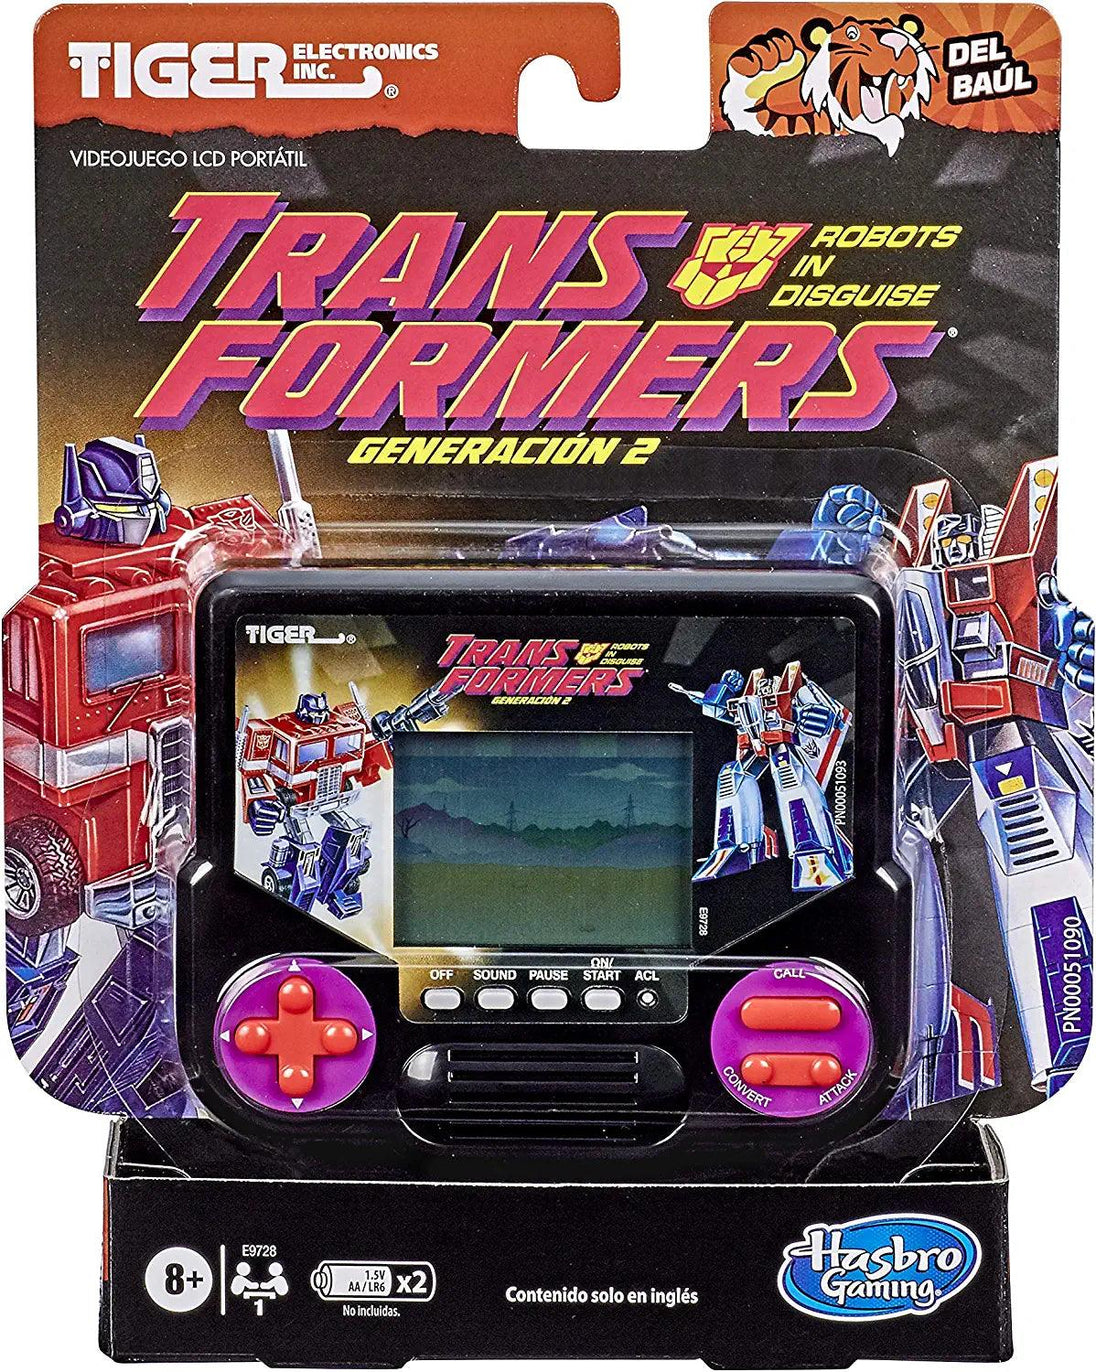 Tiger Electronics Transformers Robots in Disguise Generation 2 Electronic LCD Video Game Retro-Inspired 1 Player Handheld Game Ages 8 and Up - PremiumBrandGoods